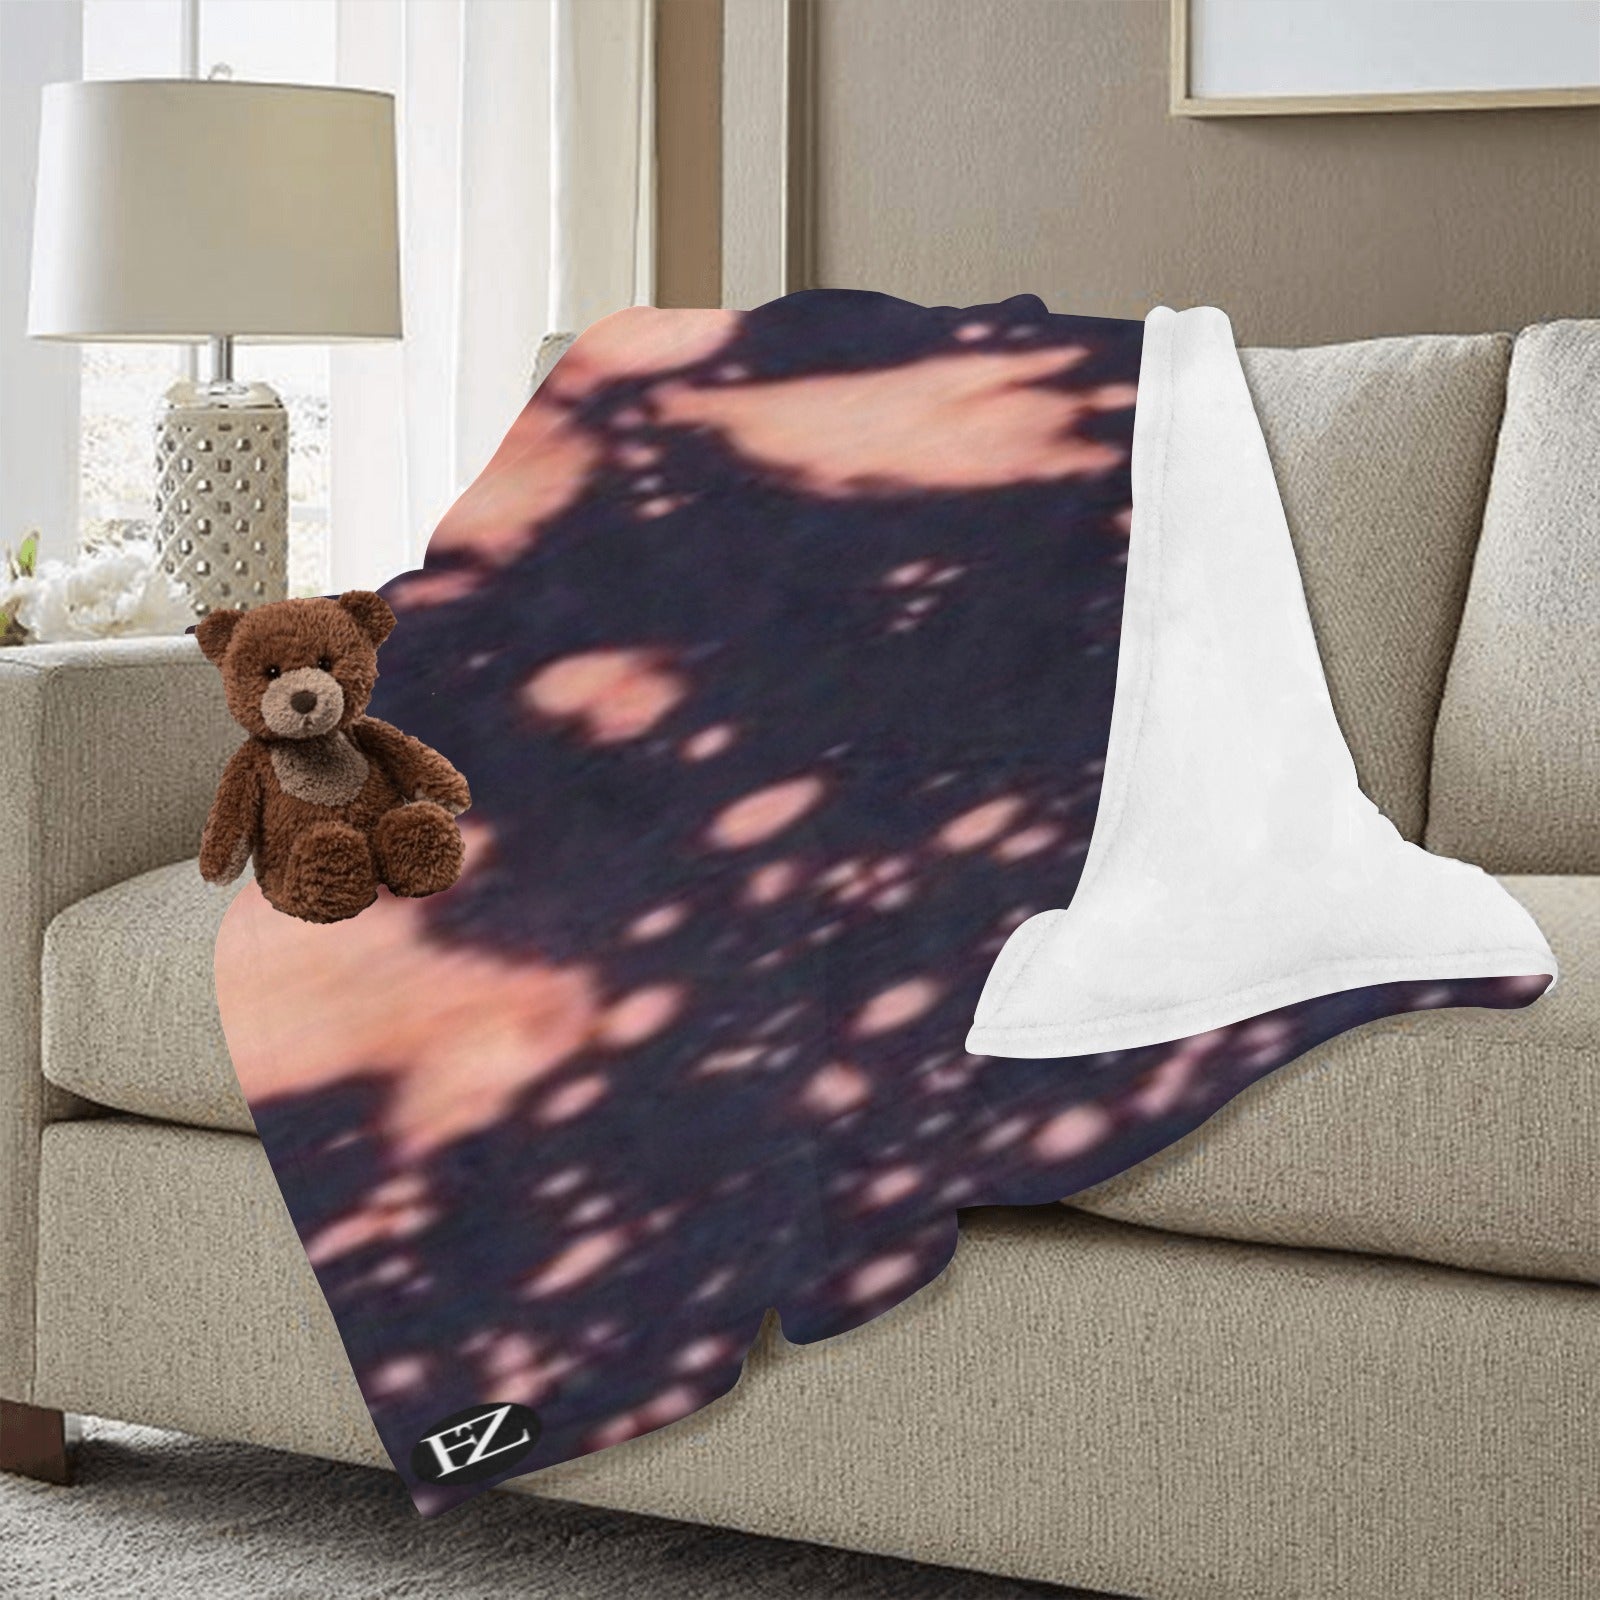 cozy thick blanket abstract 3 ultra-soft micro fleece blanket 60"x80" (thick)